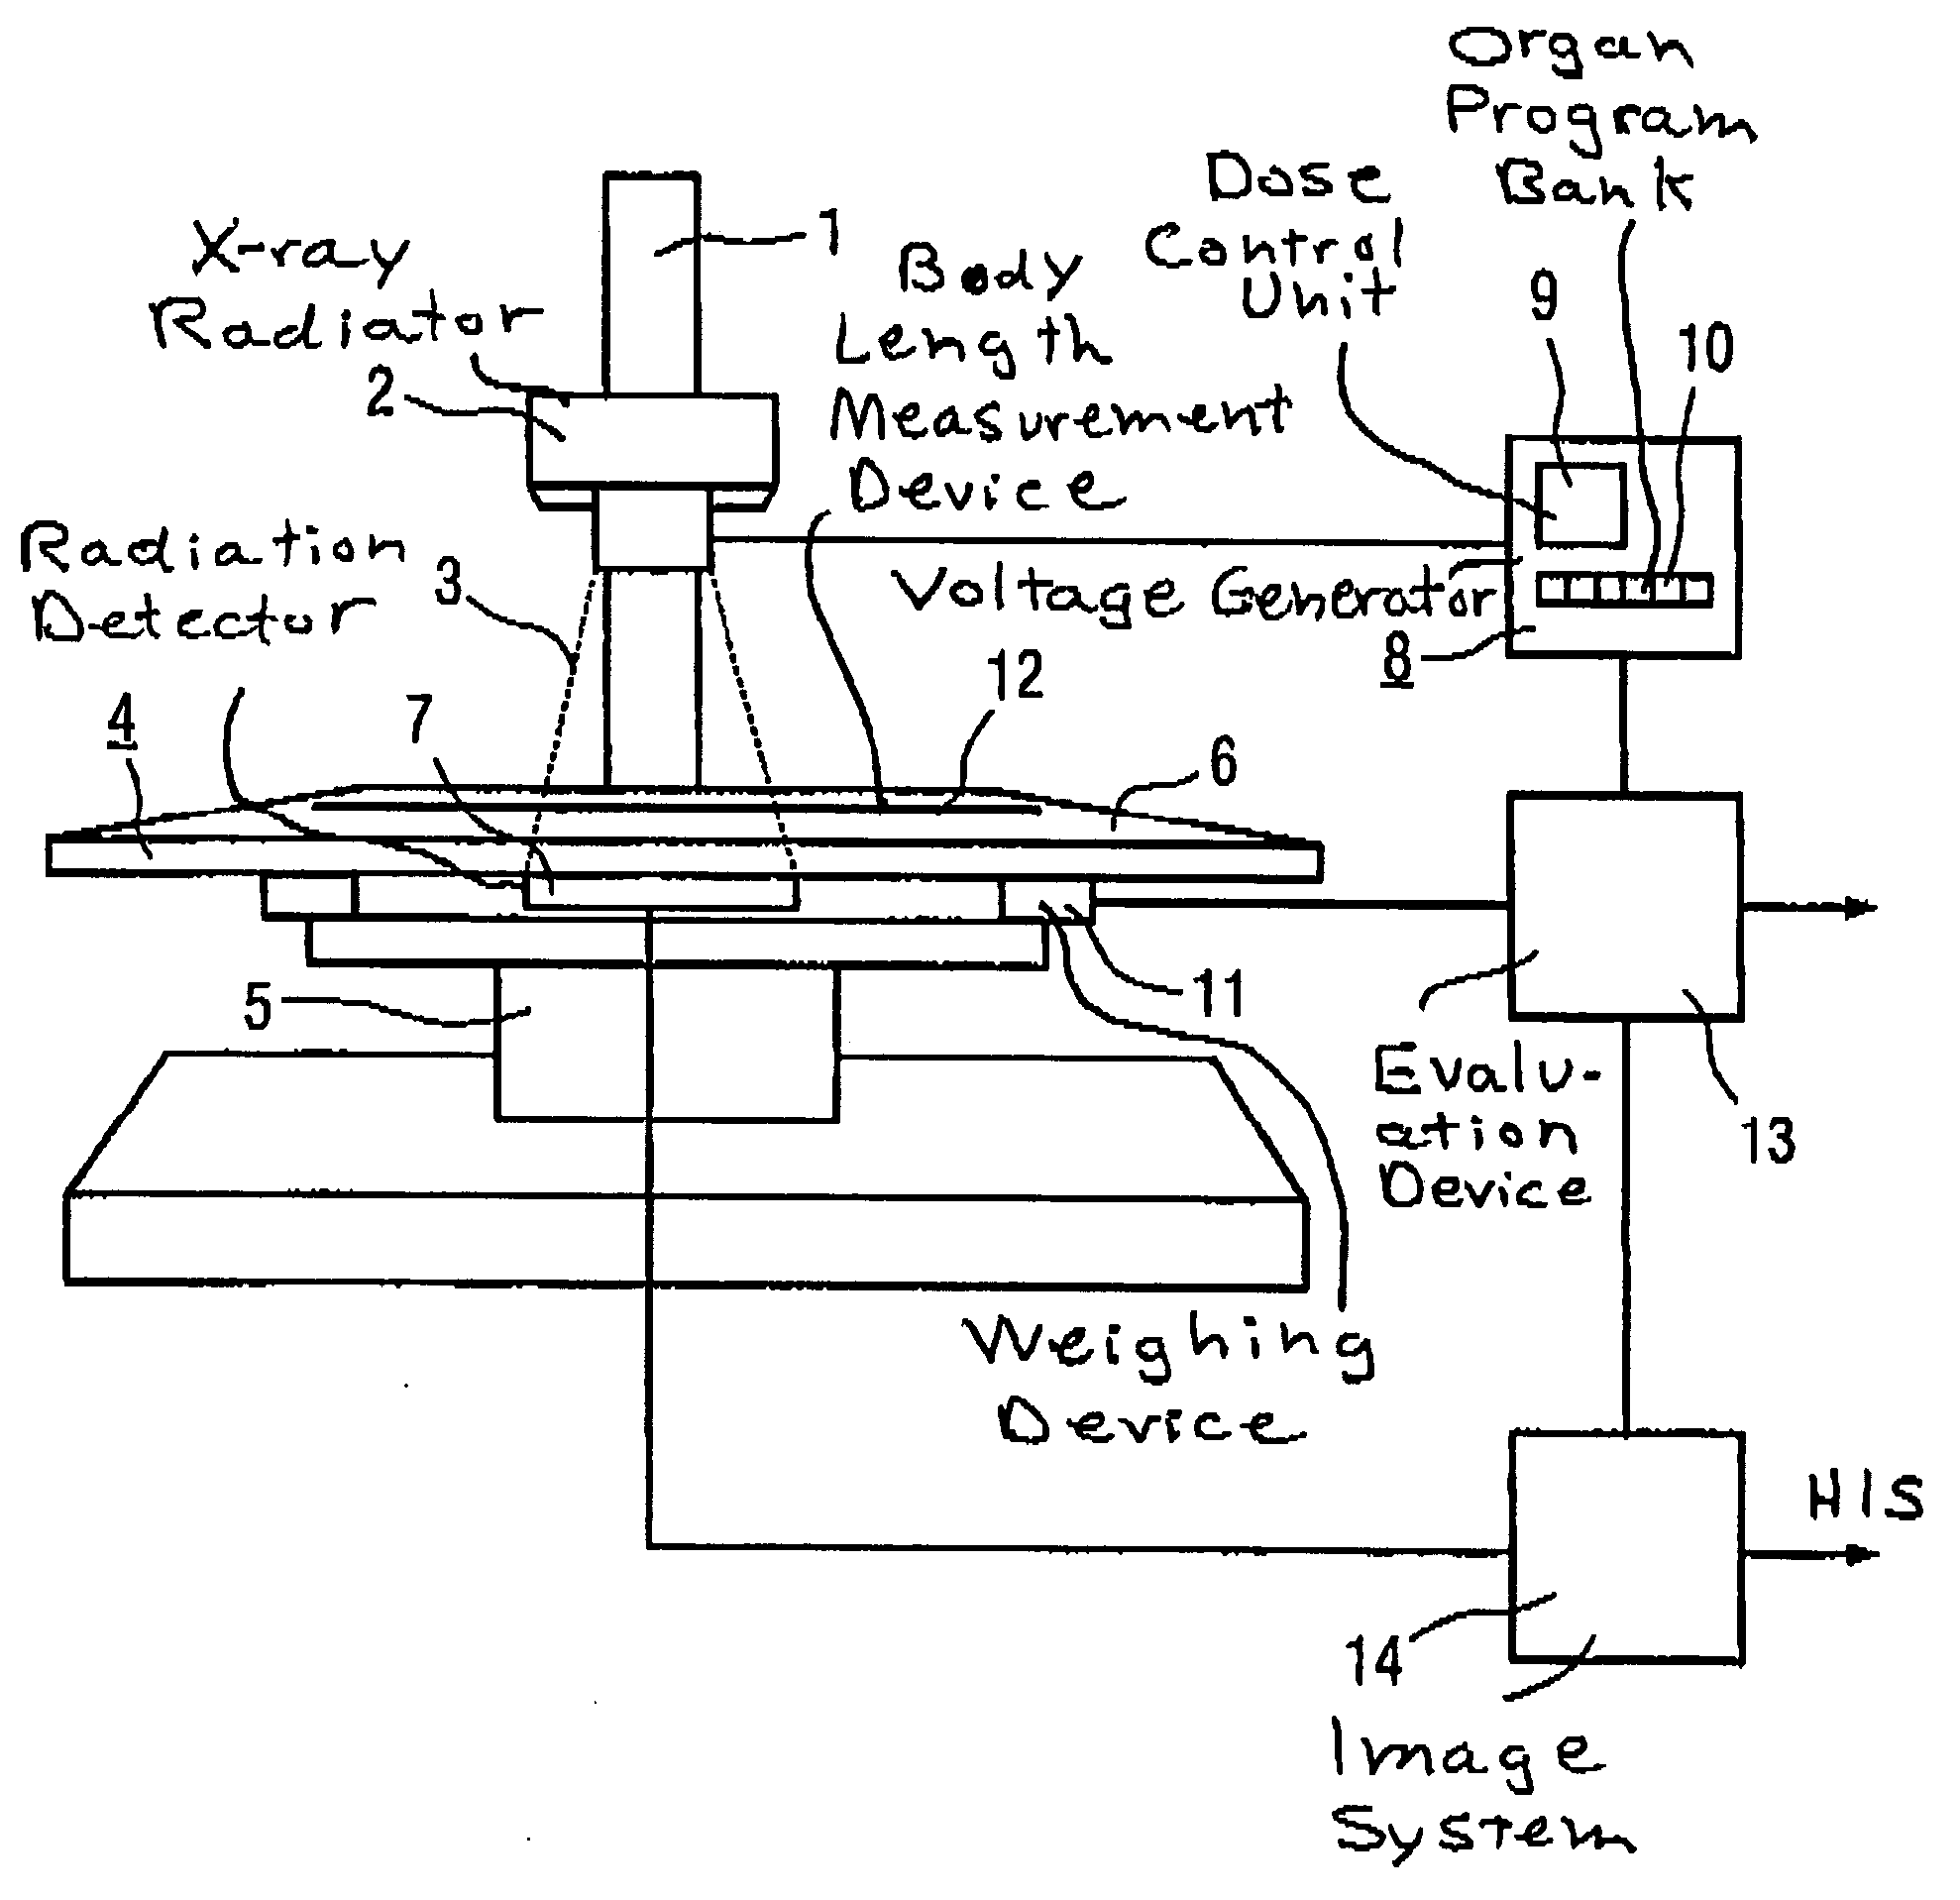 X-ray diagnostic apparatus with a body mass index calculator for controlling x-ray emissions